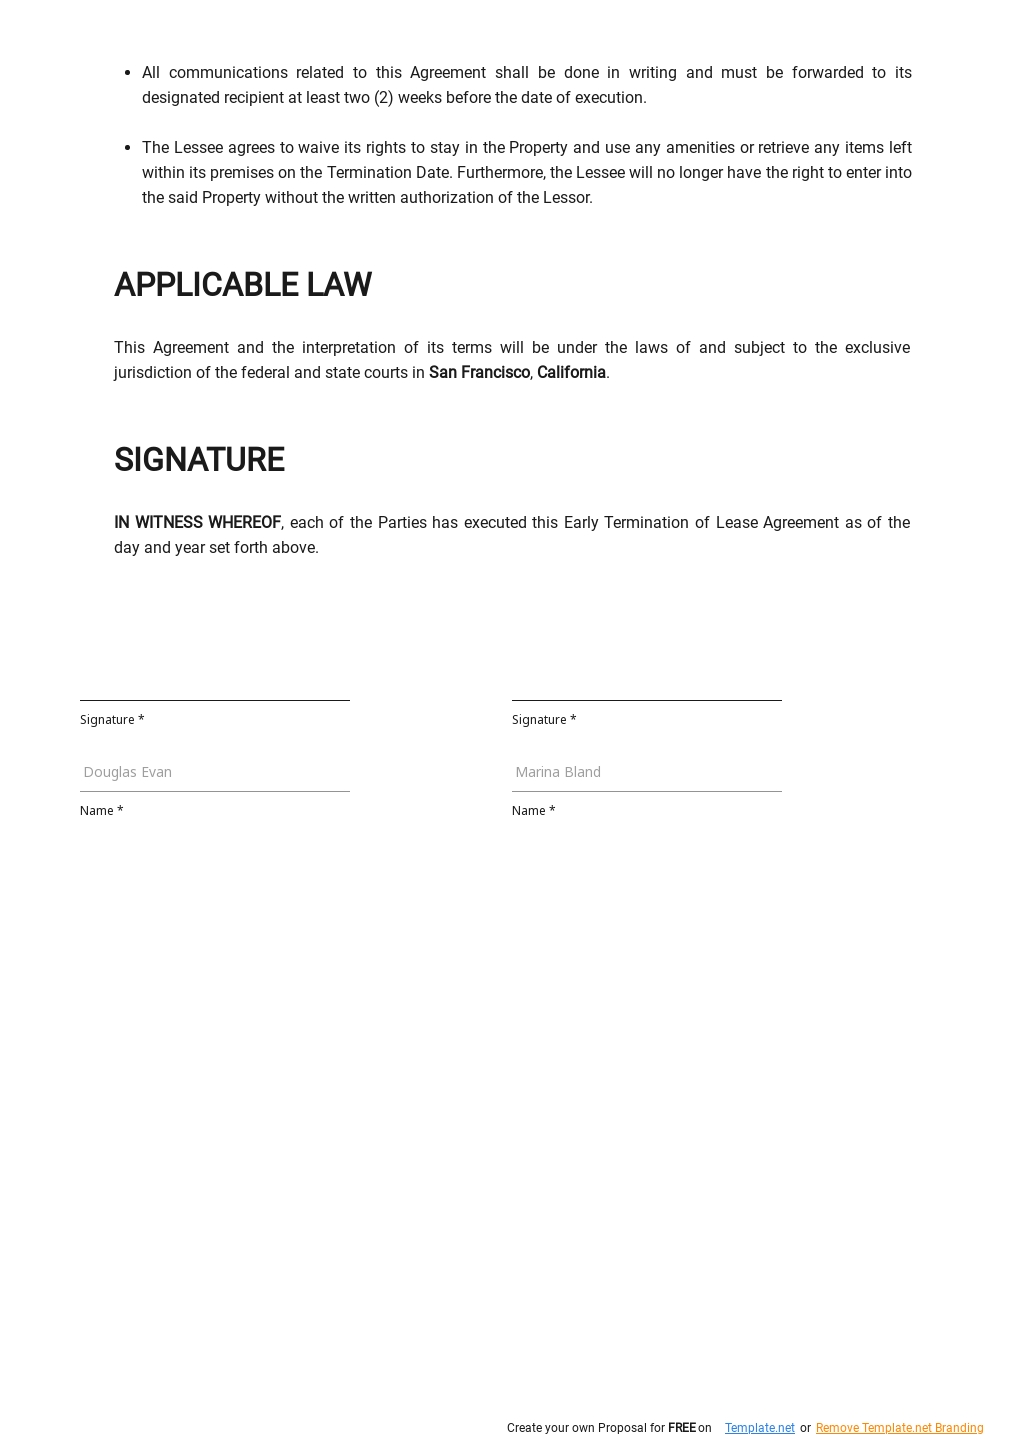 Early Termination Of Lease Agreement Template 2.jpe